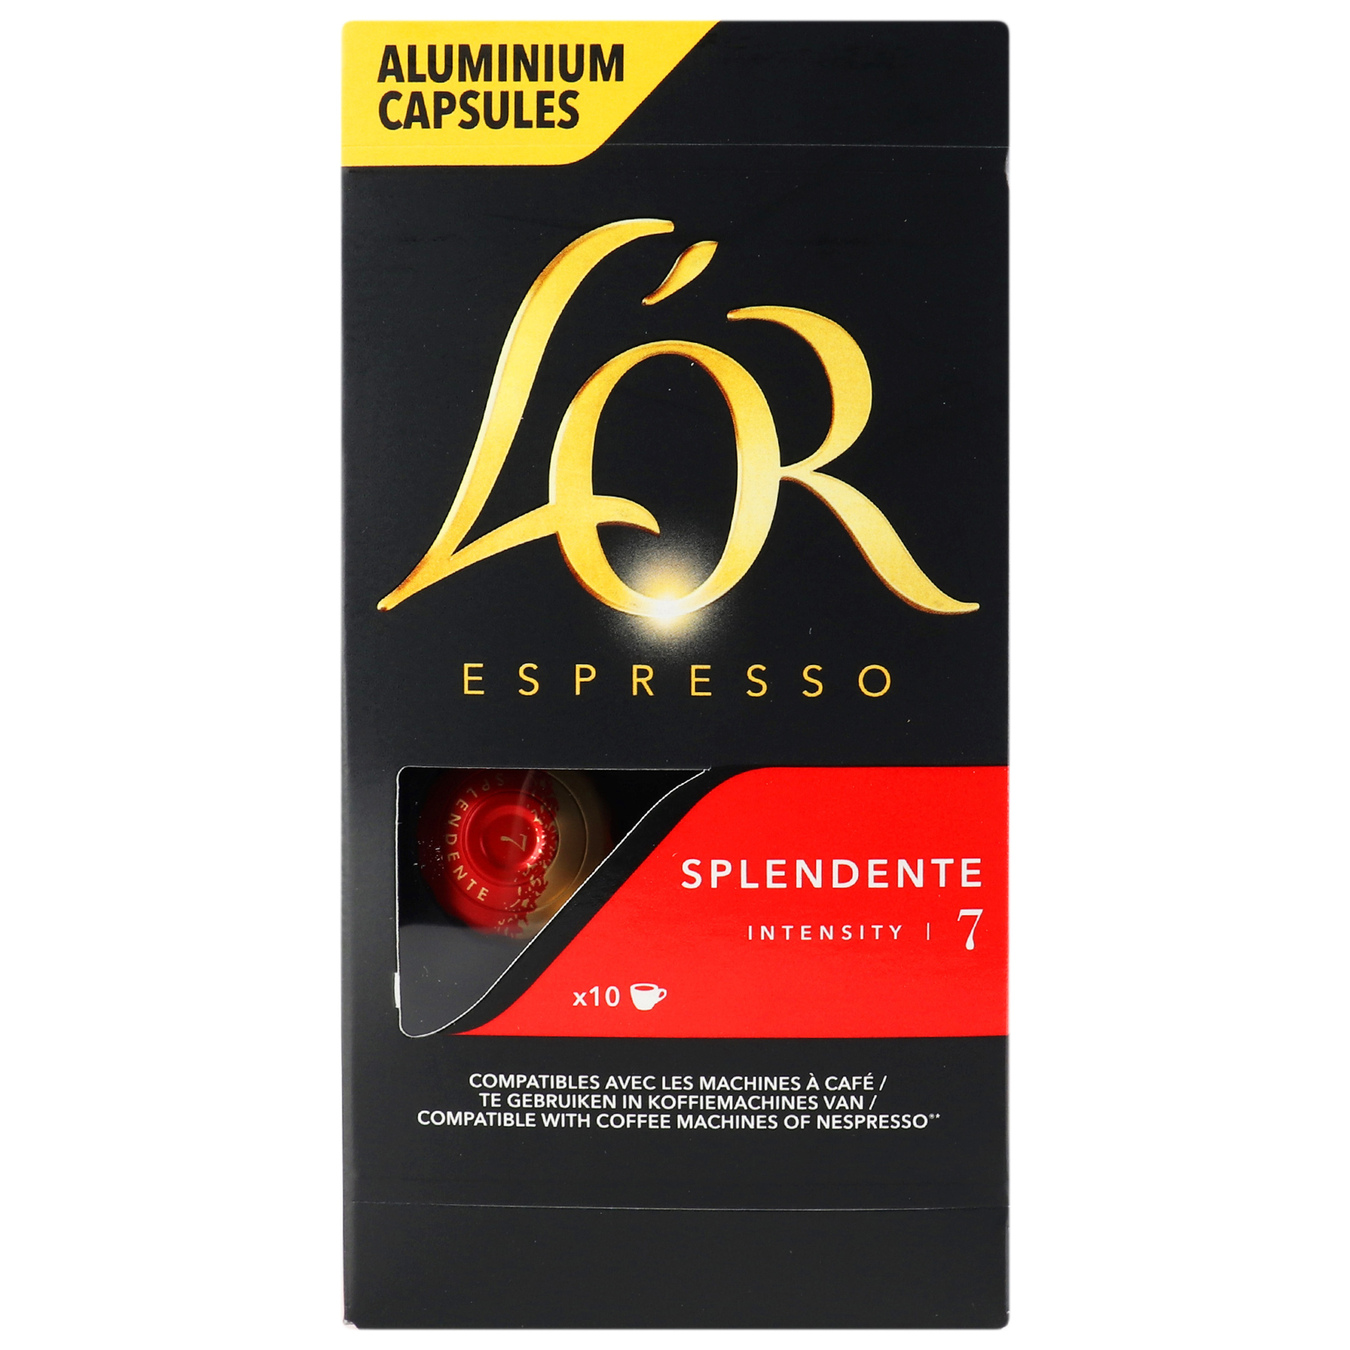 L'OR Espresso Splendente natural roasted ground coffee in capsules 10*52g